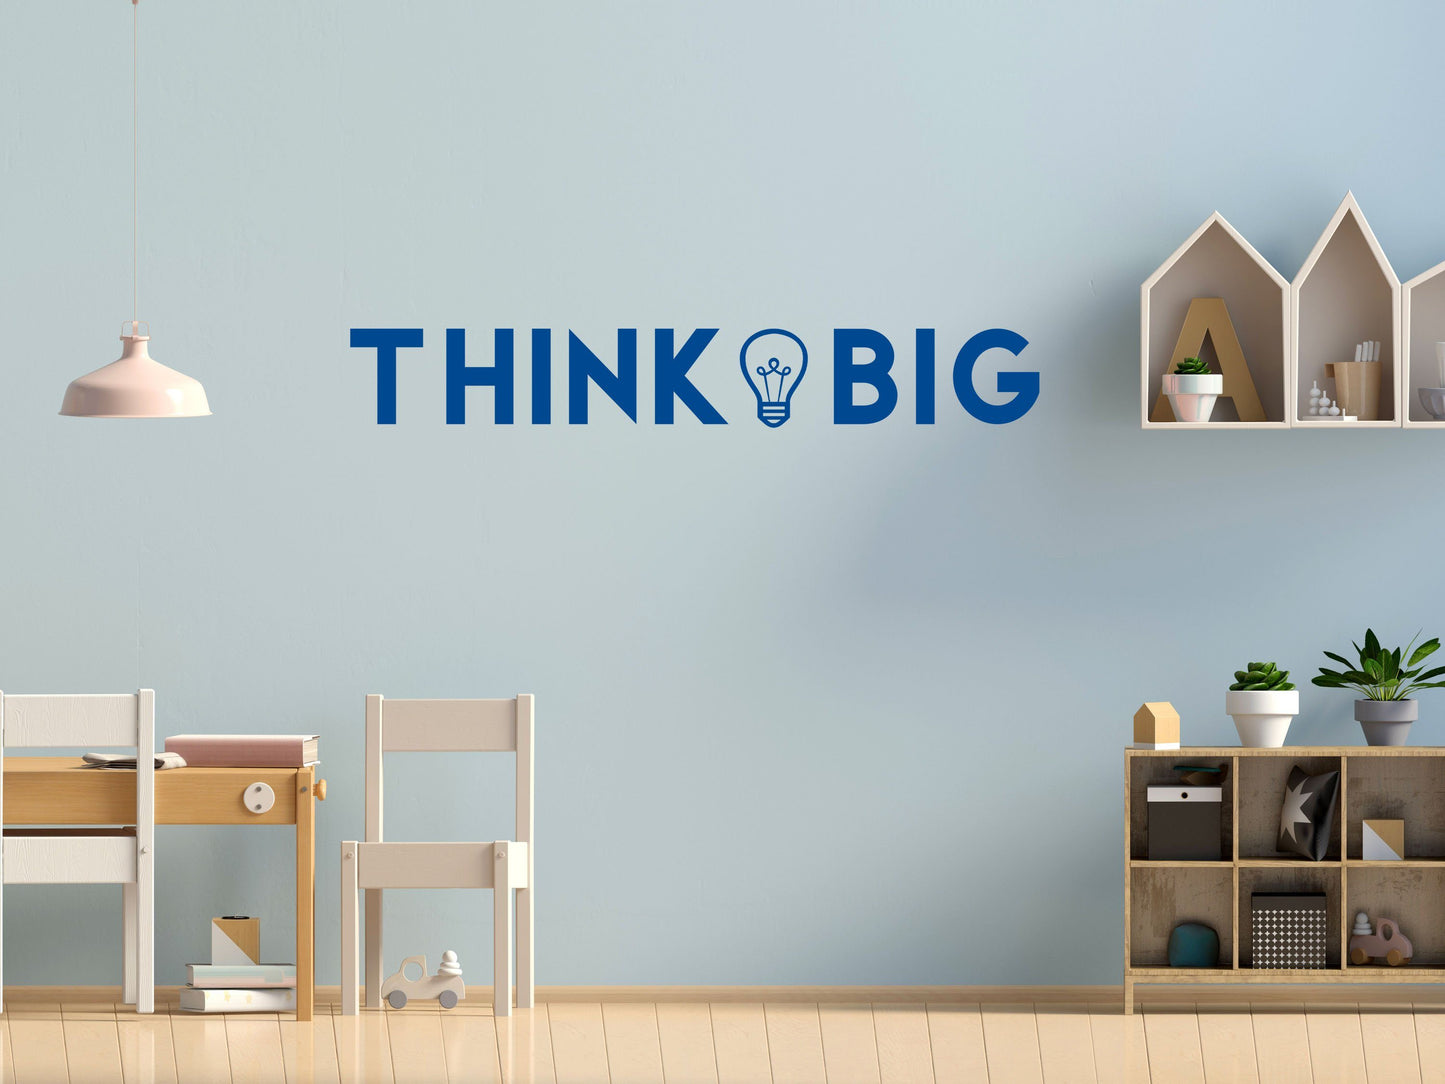 Think Big Decal Office Motivational Decal- Inspirational Wall Signs Vinyl Wall Decal Done 